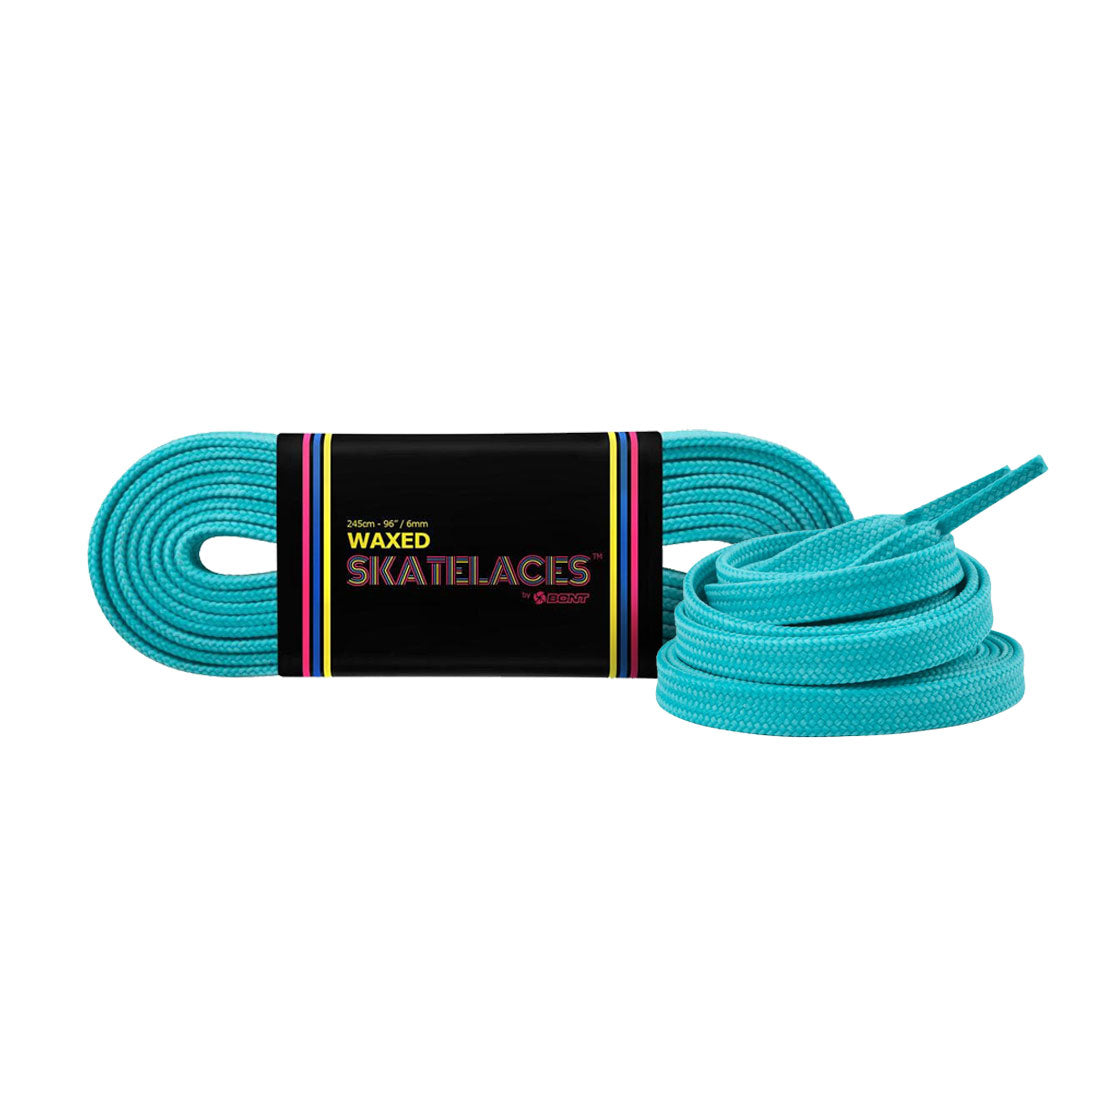 Bont Waxed 8mm Laces - 200cm/79in Pool Party Blue Laces